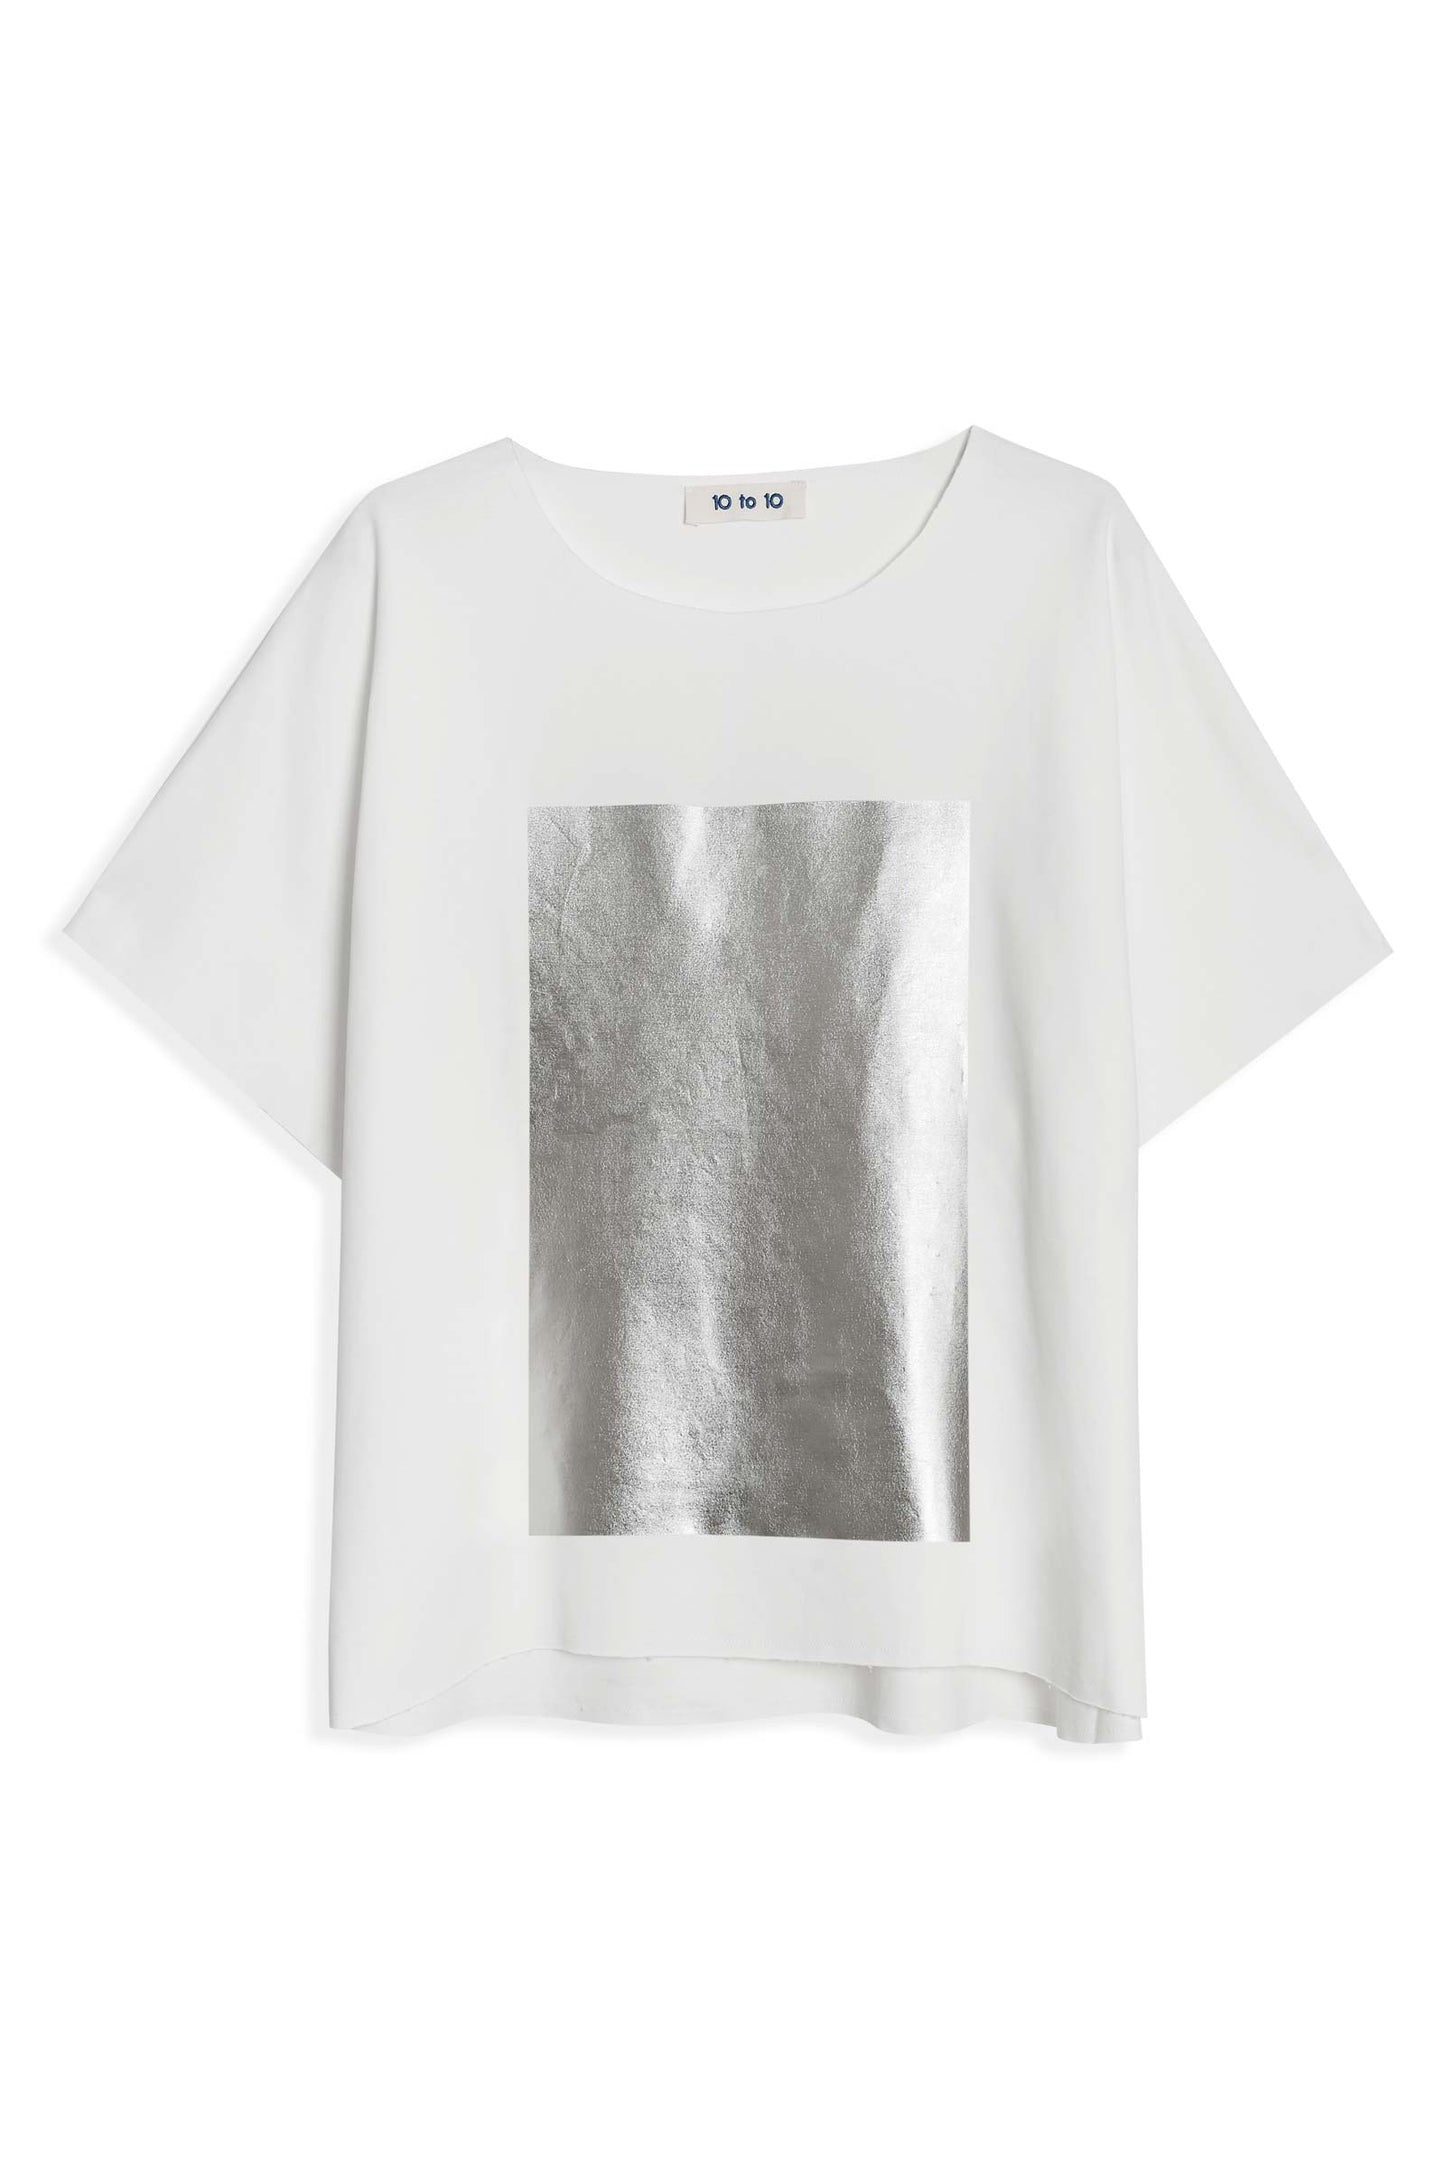 10 to 10 White T-Shirt with silver square product image